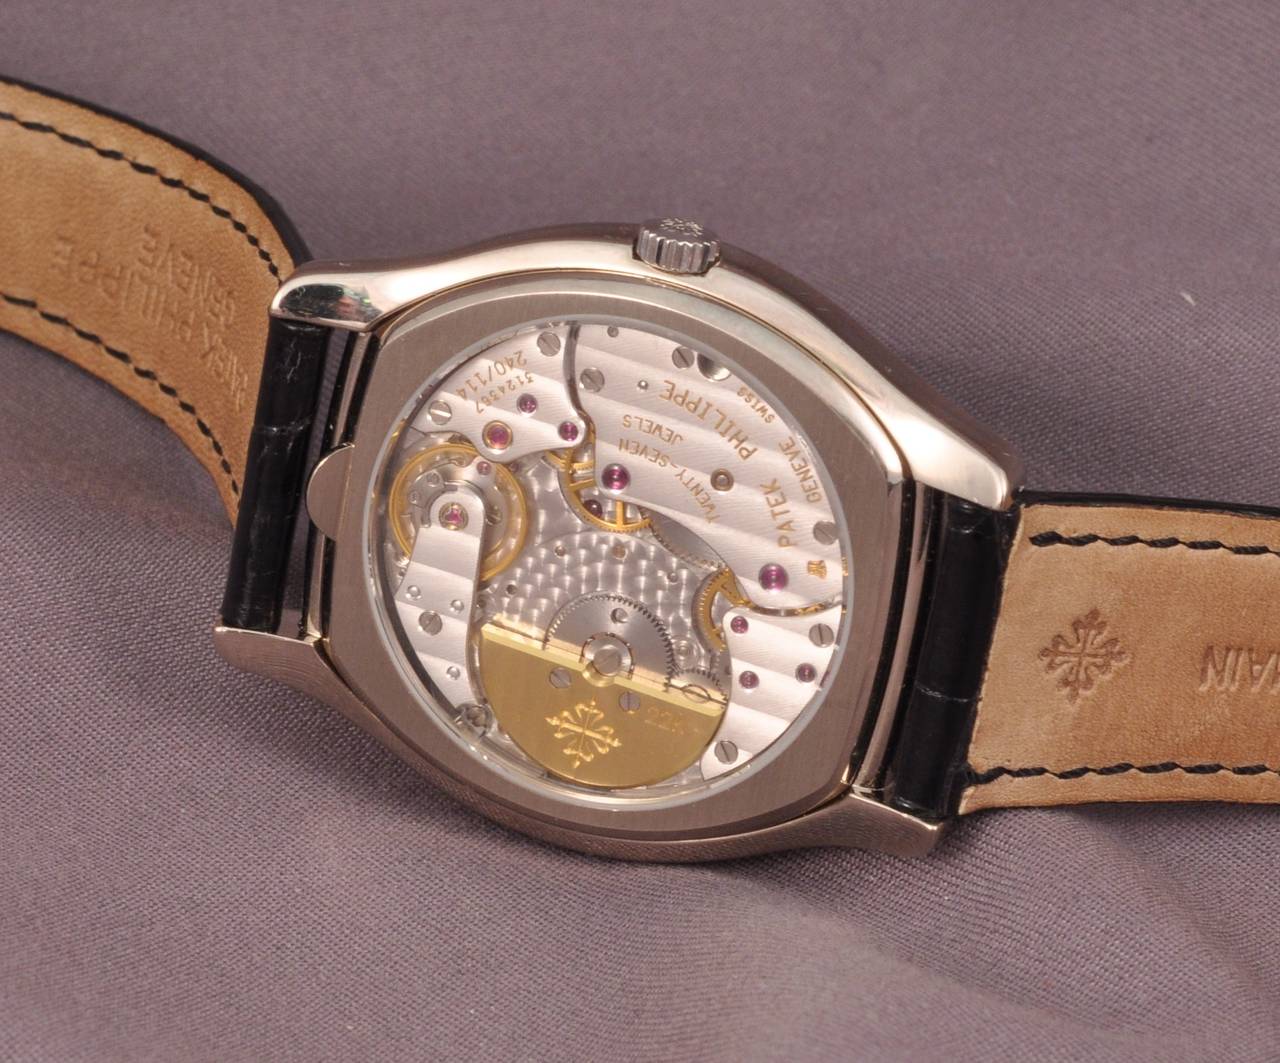 Patek Philippe White Gold Perpetual Calendar Manual Wind Wristwatch Ref 5041G In Excellent Condition For Sale In Paris, FR